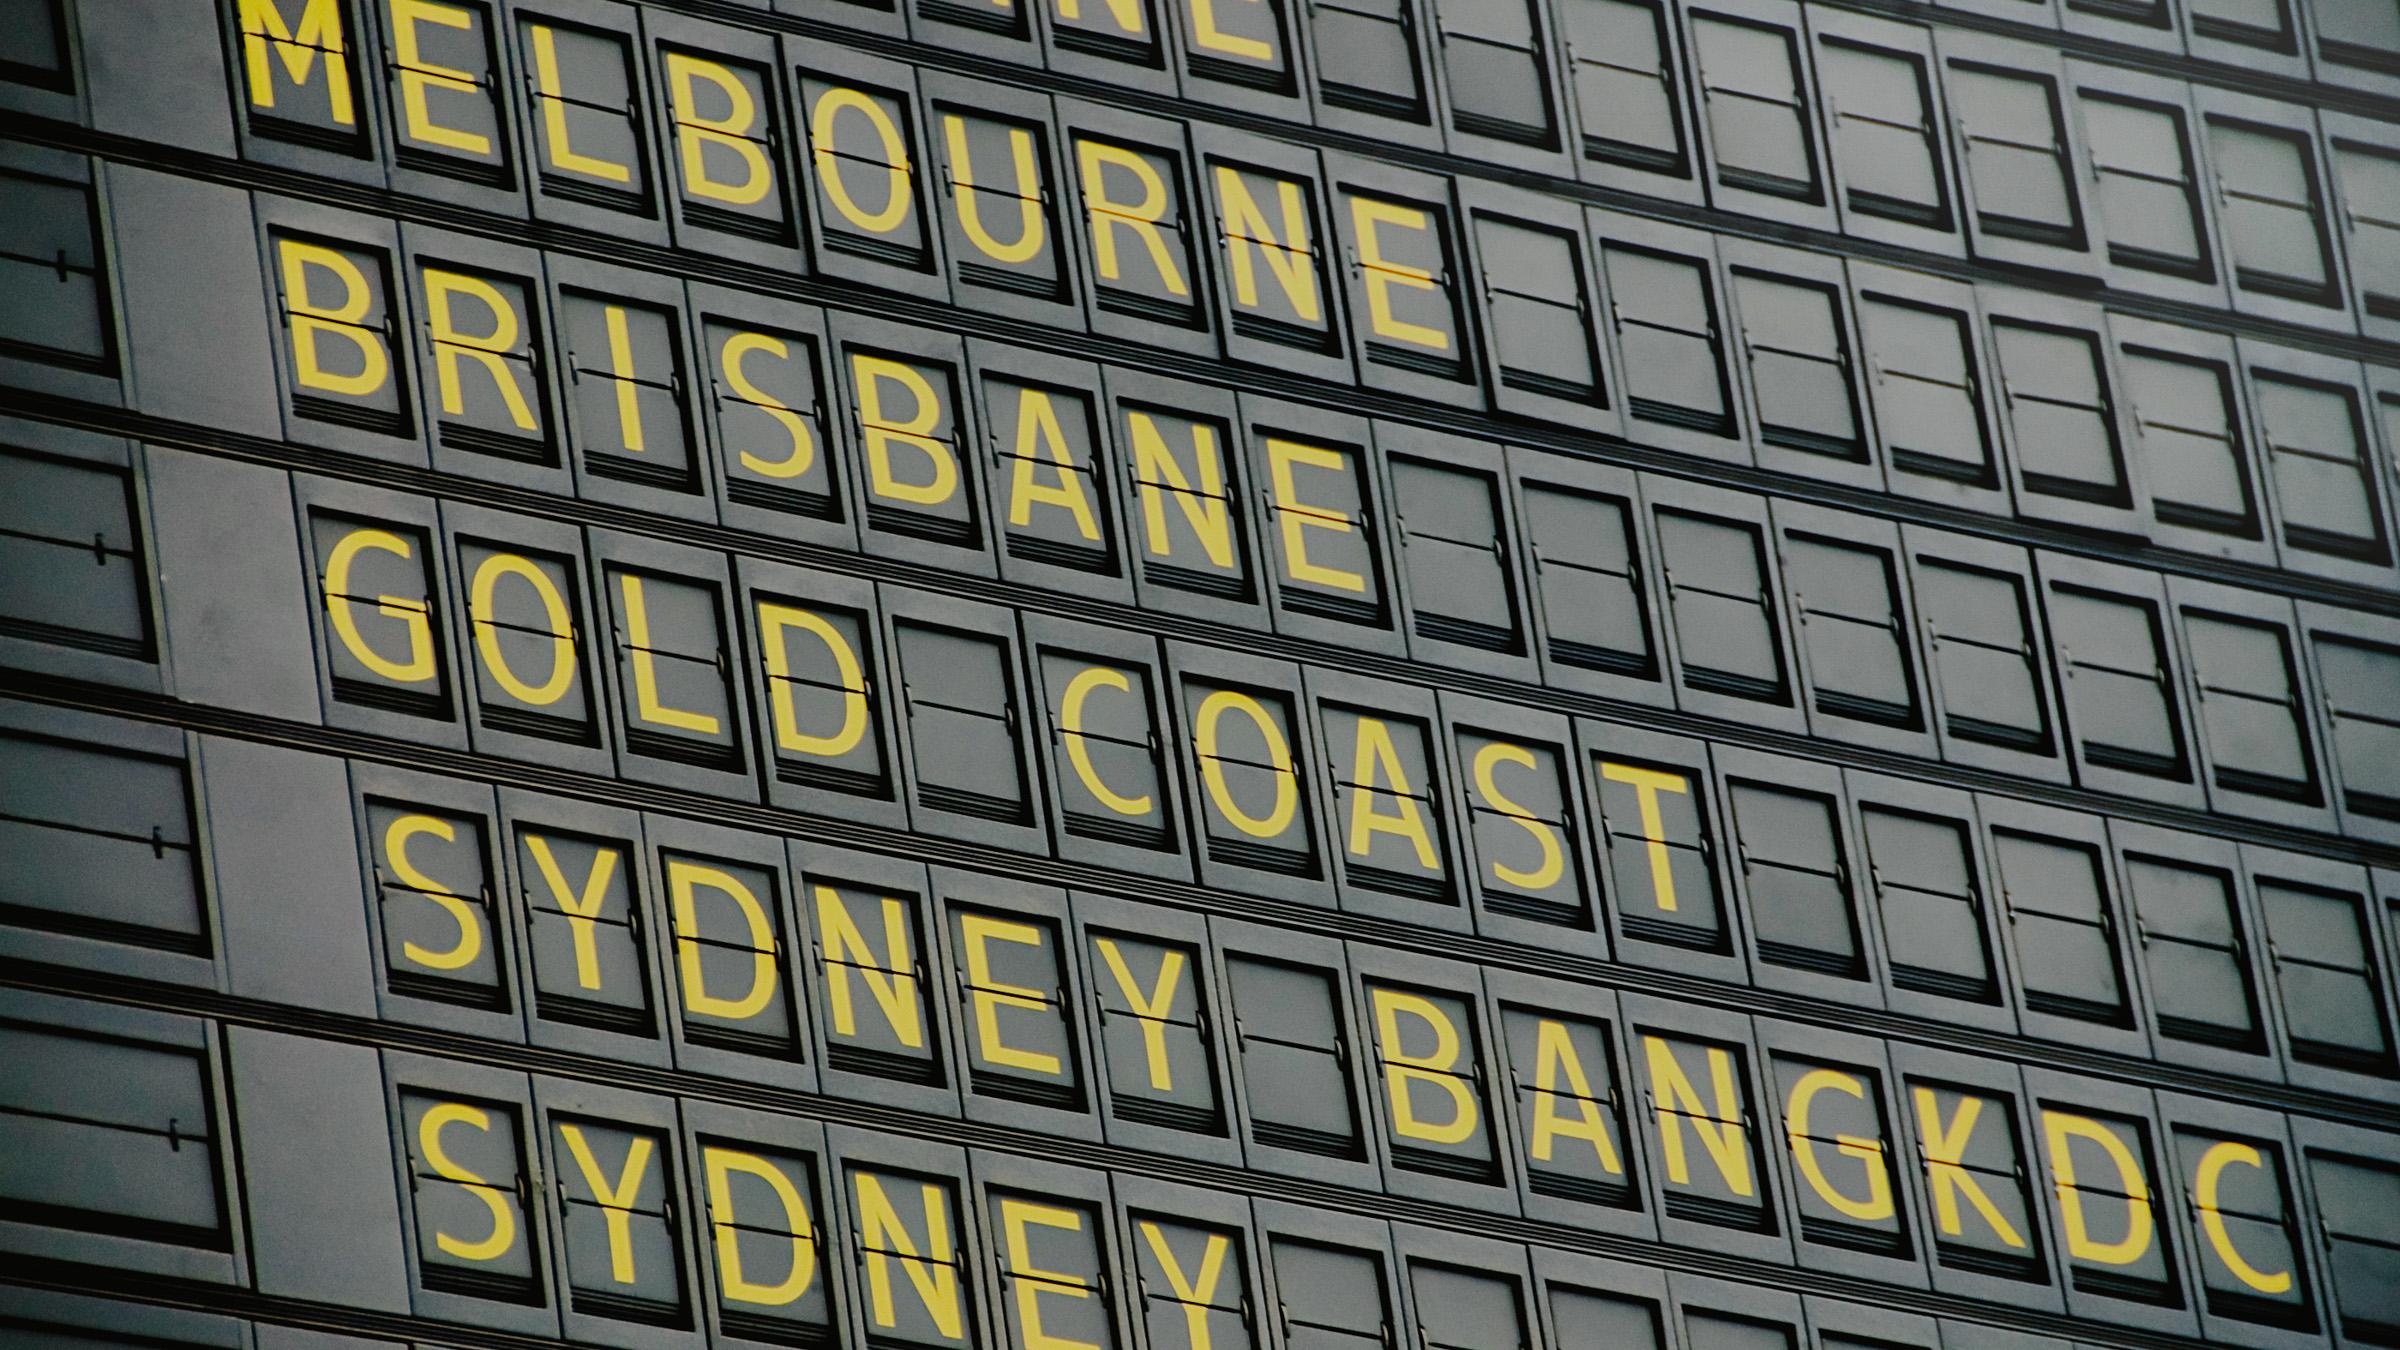 Black departure board showing Australian destinations with yellow letters